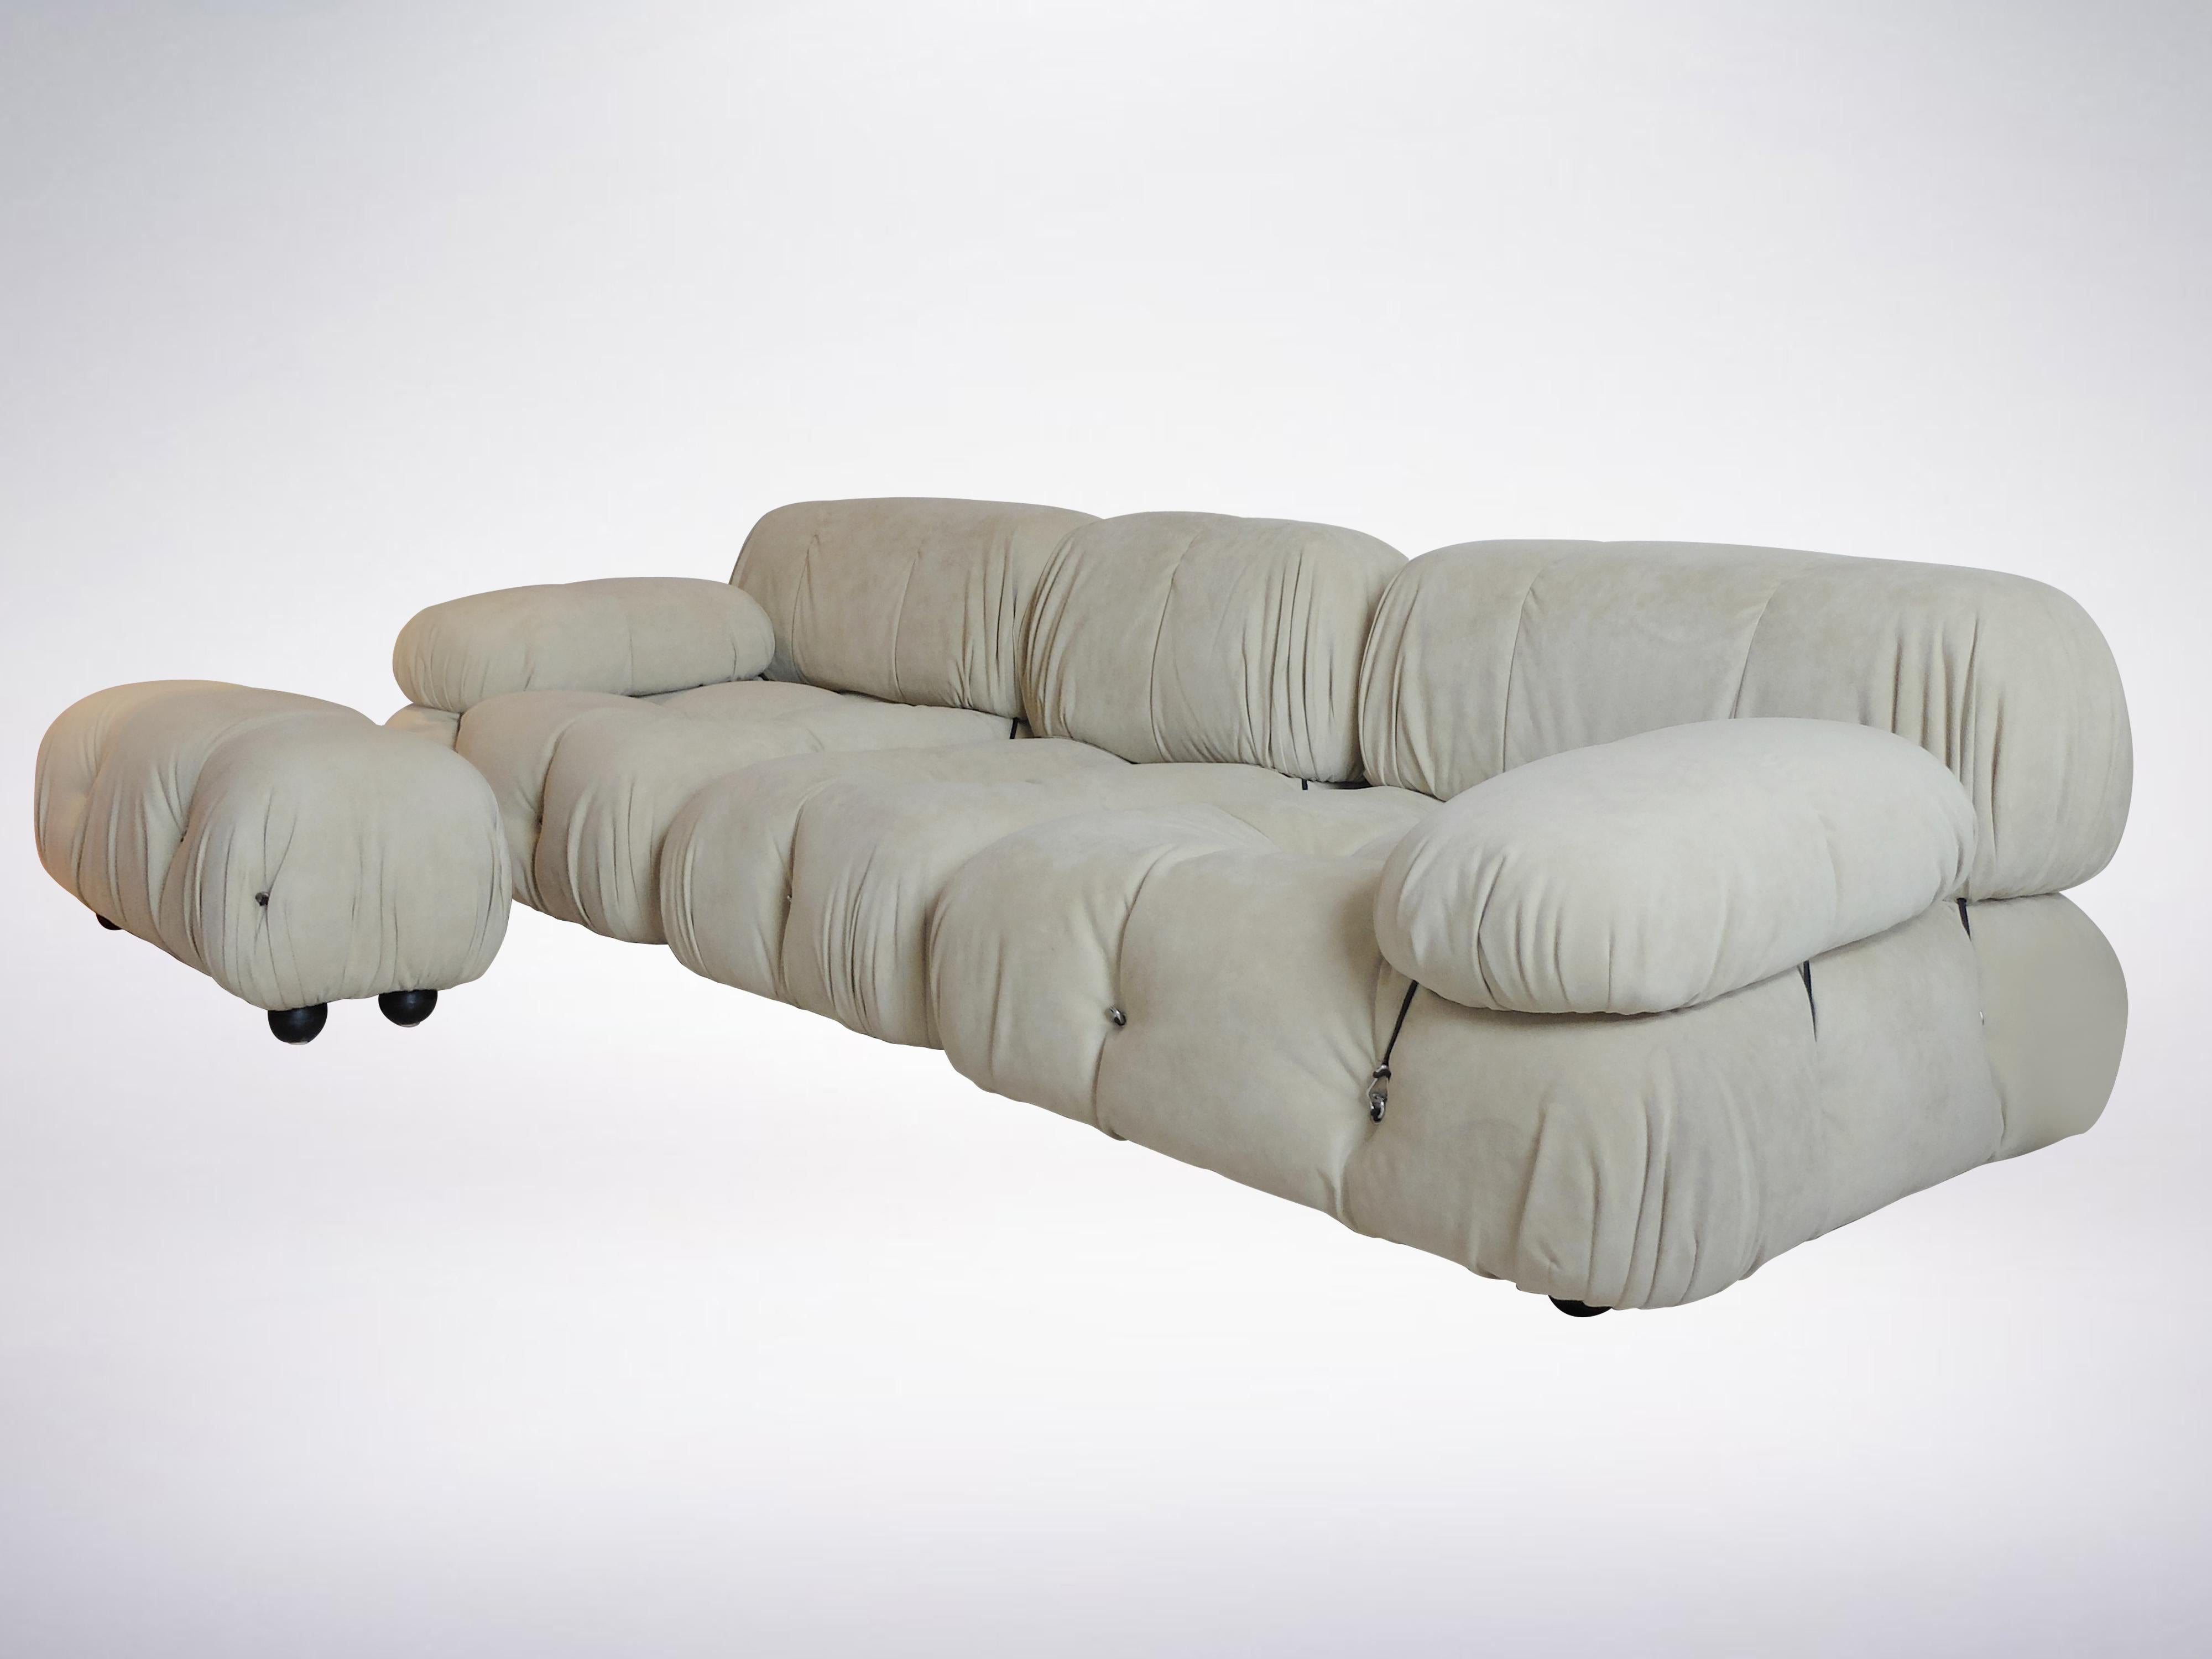 Mario Bellini Camaleonda sofa set of 4 elements in a lush alcantara white upholstery, made for B&B Italia in 1970. The set also includes rare ottomans (foot-rests) that are re-upholstered in matching fabric.
Original company logo markings